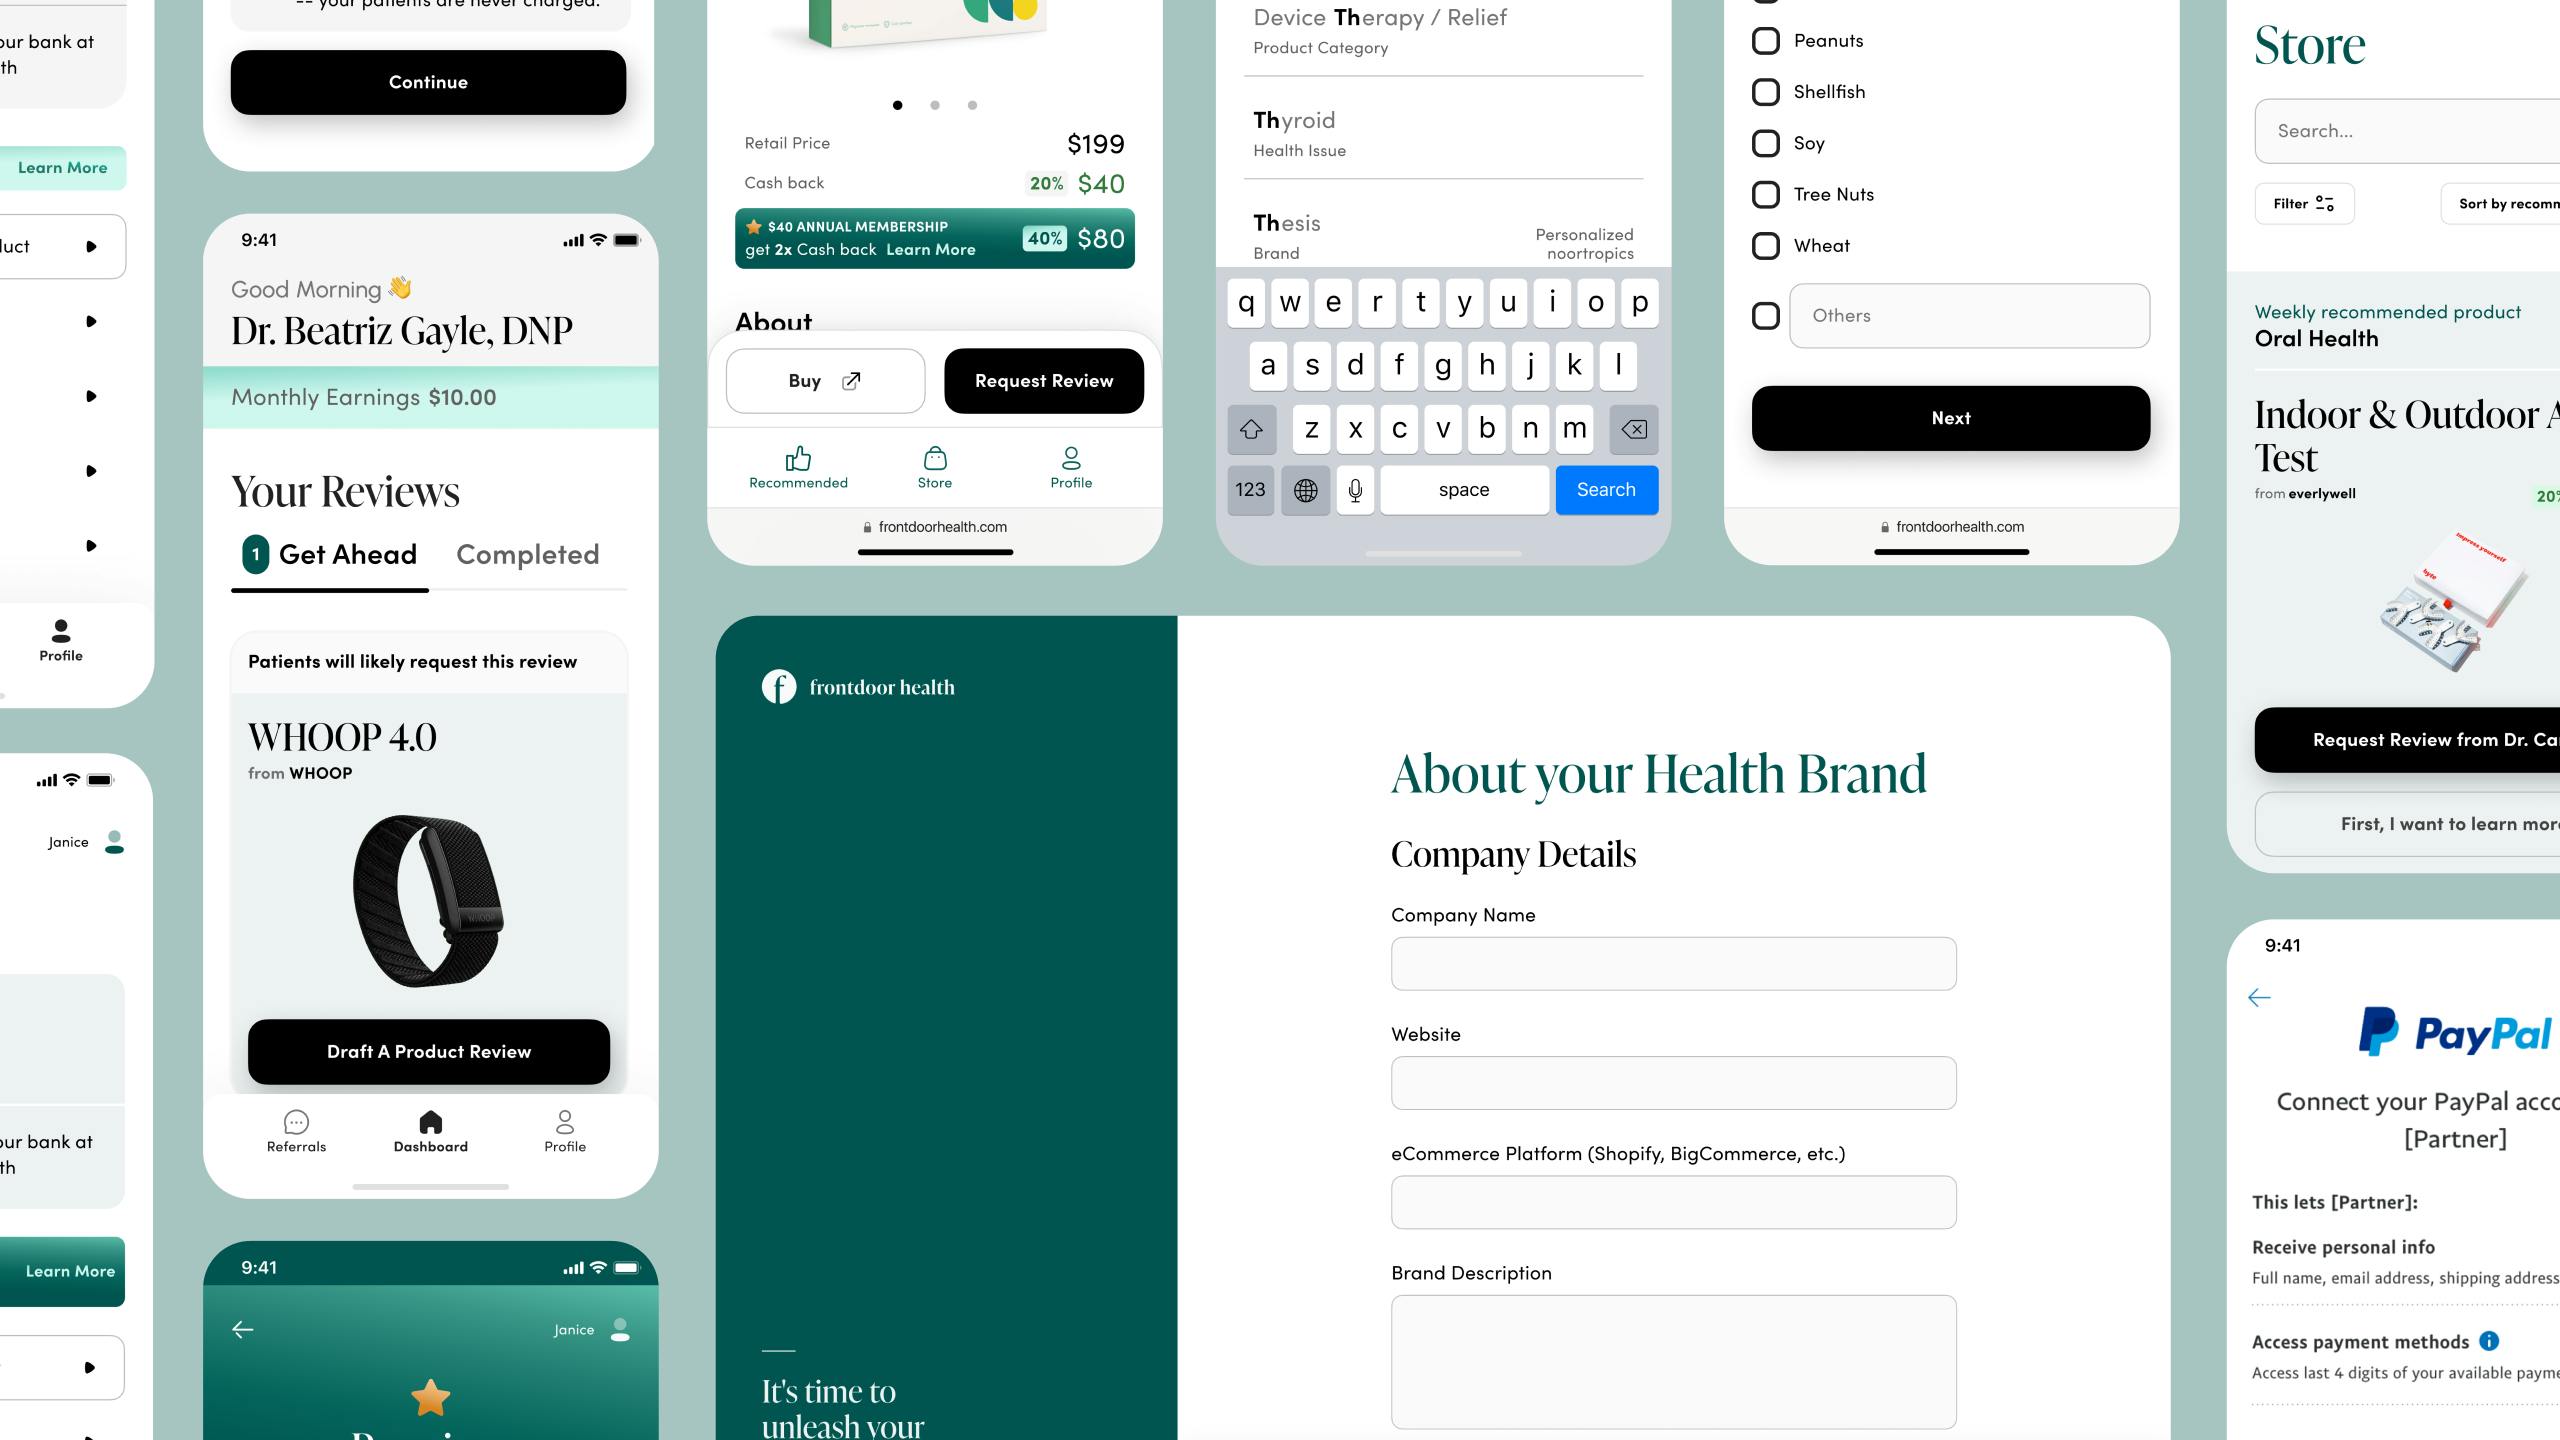 A selection of Frontrow Health screens, both mobile and desktop, arranged on a grid with a green background.